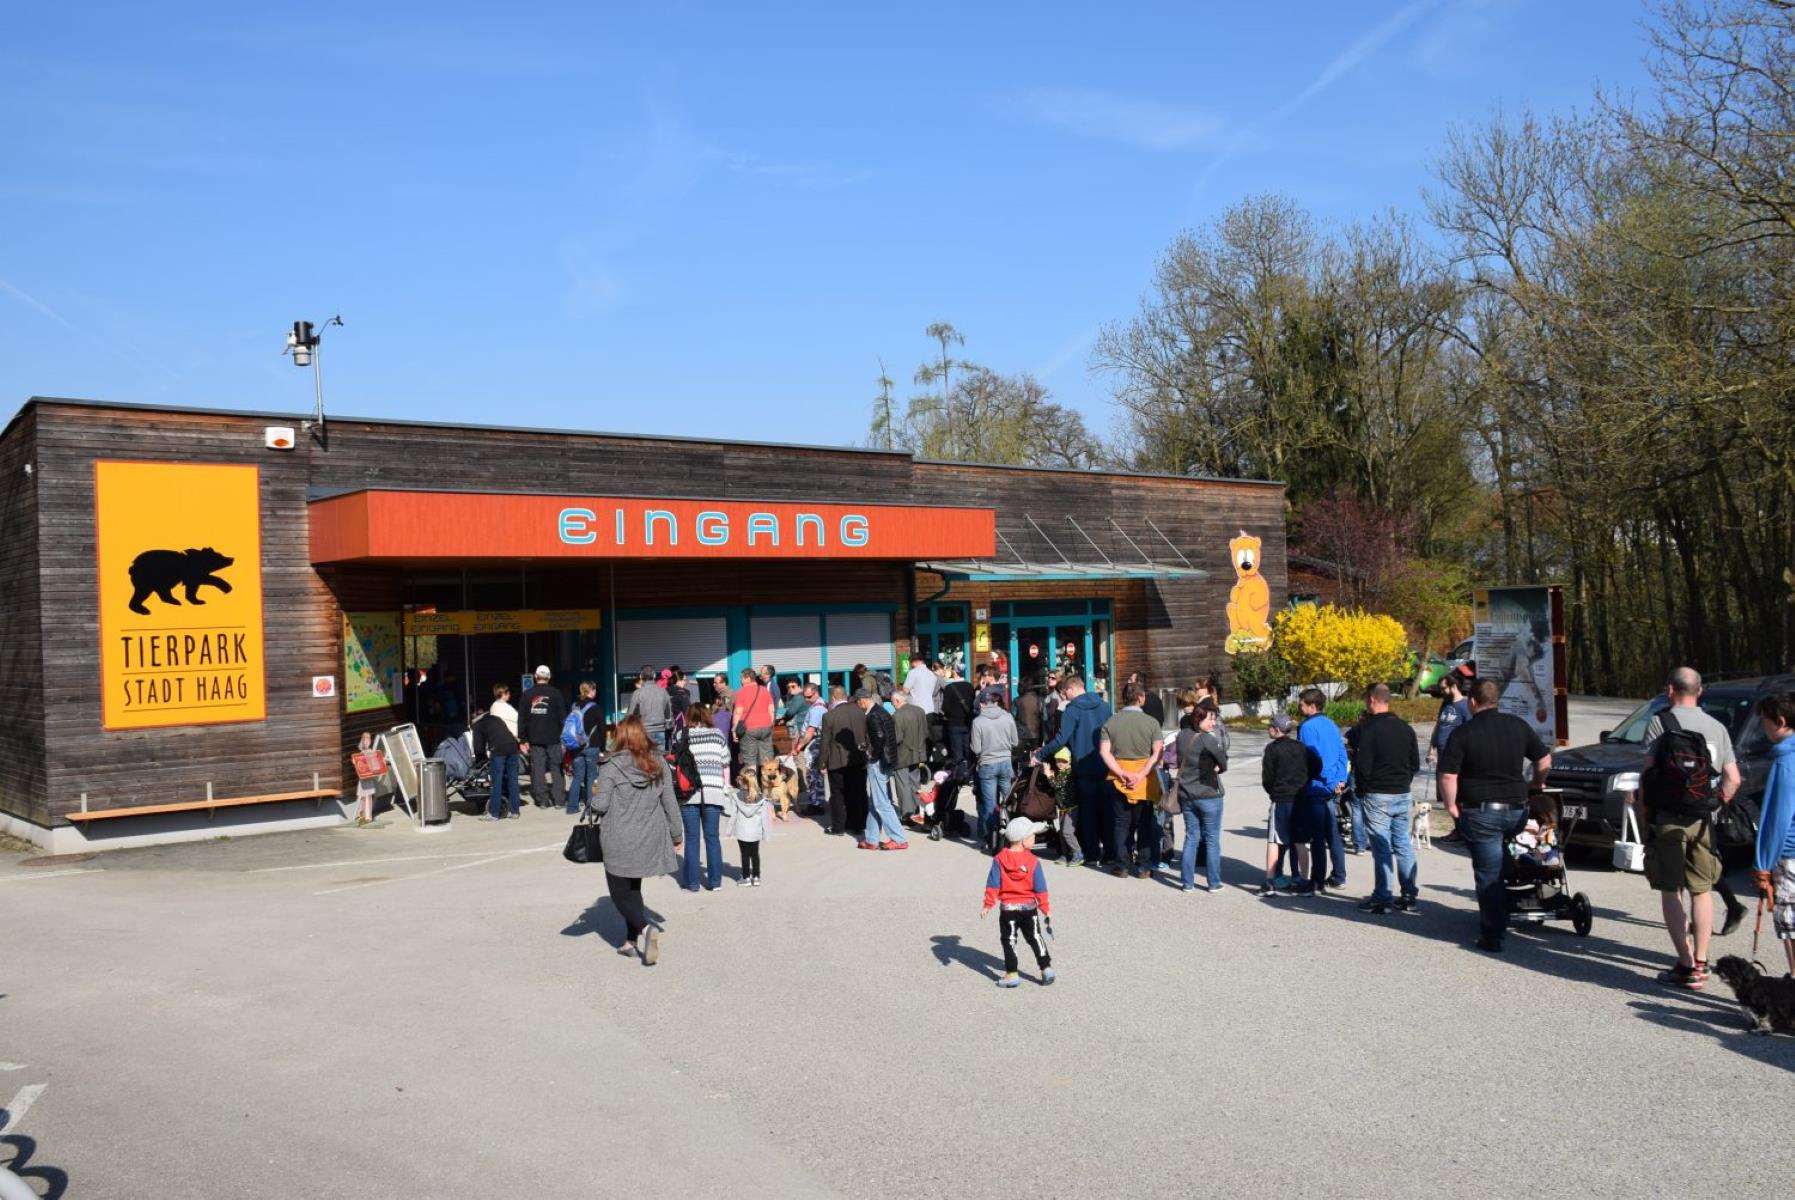 18-intriguing-facts-about-tierpark-stadt-haag